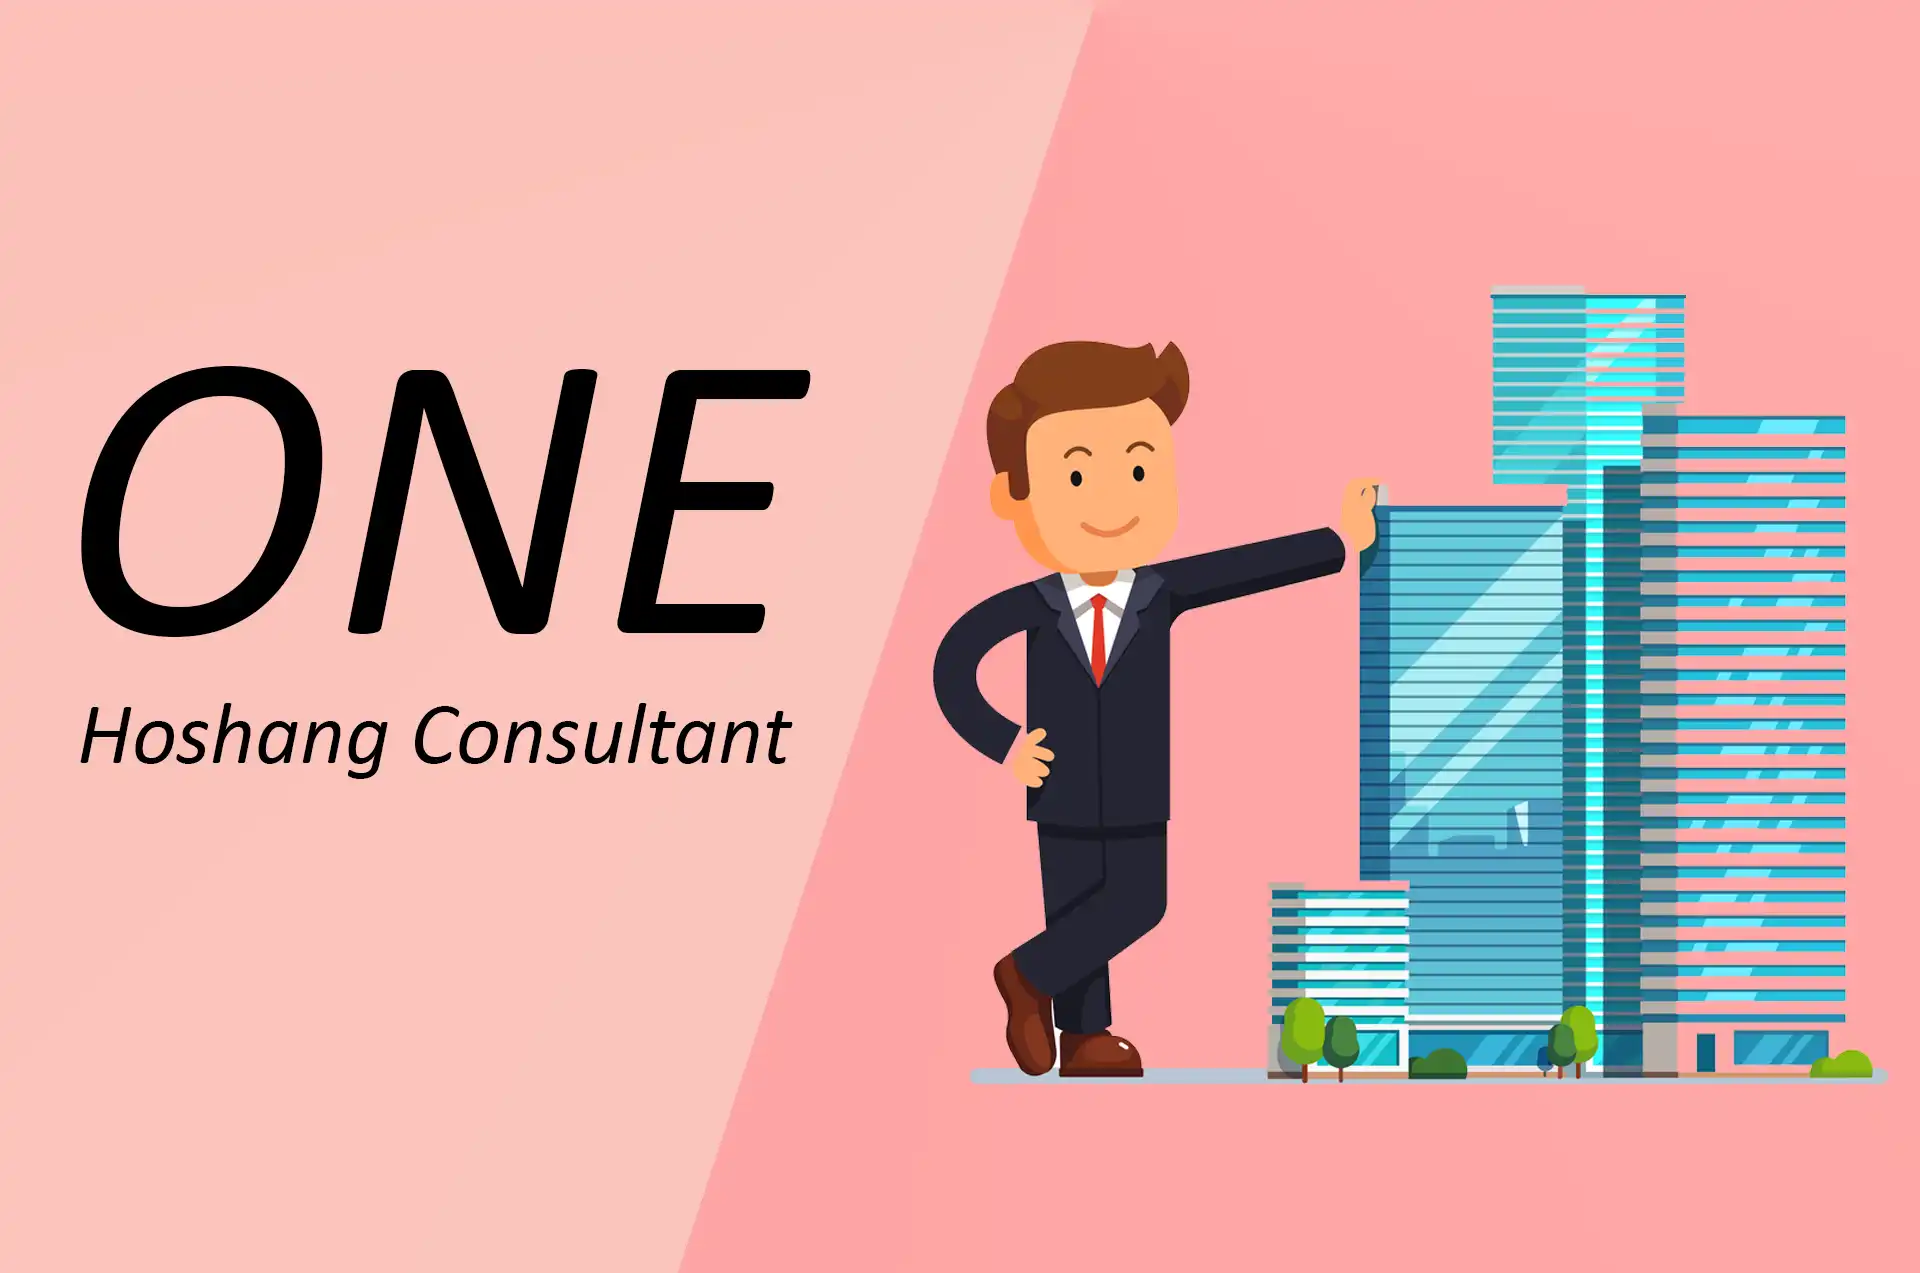 What is One Hoshang Consultant?